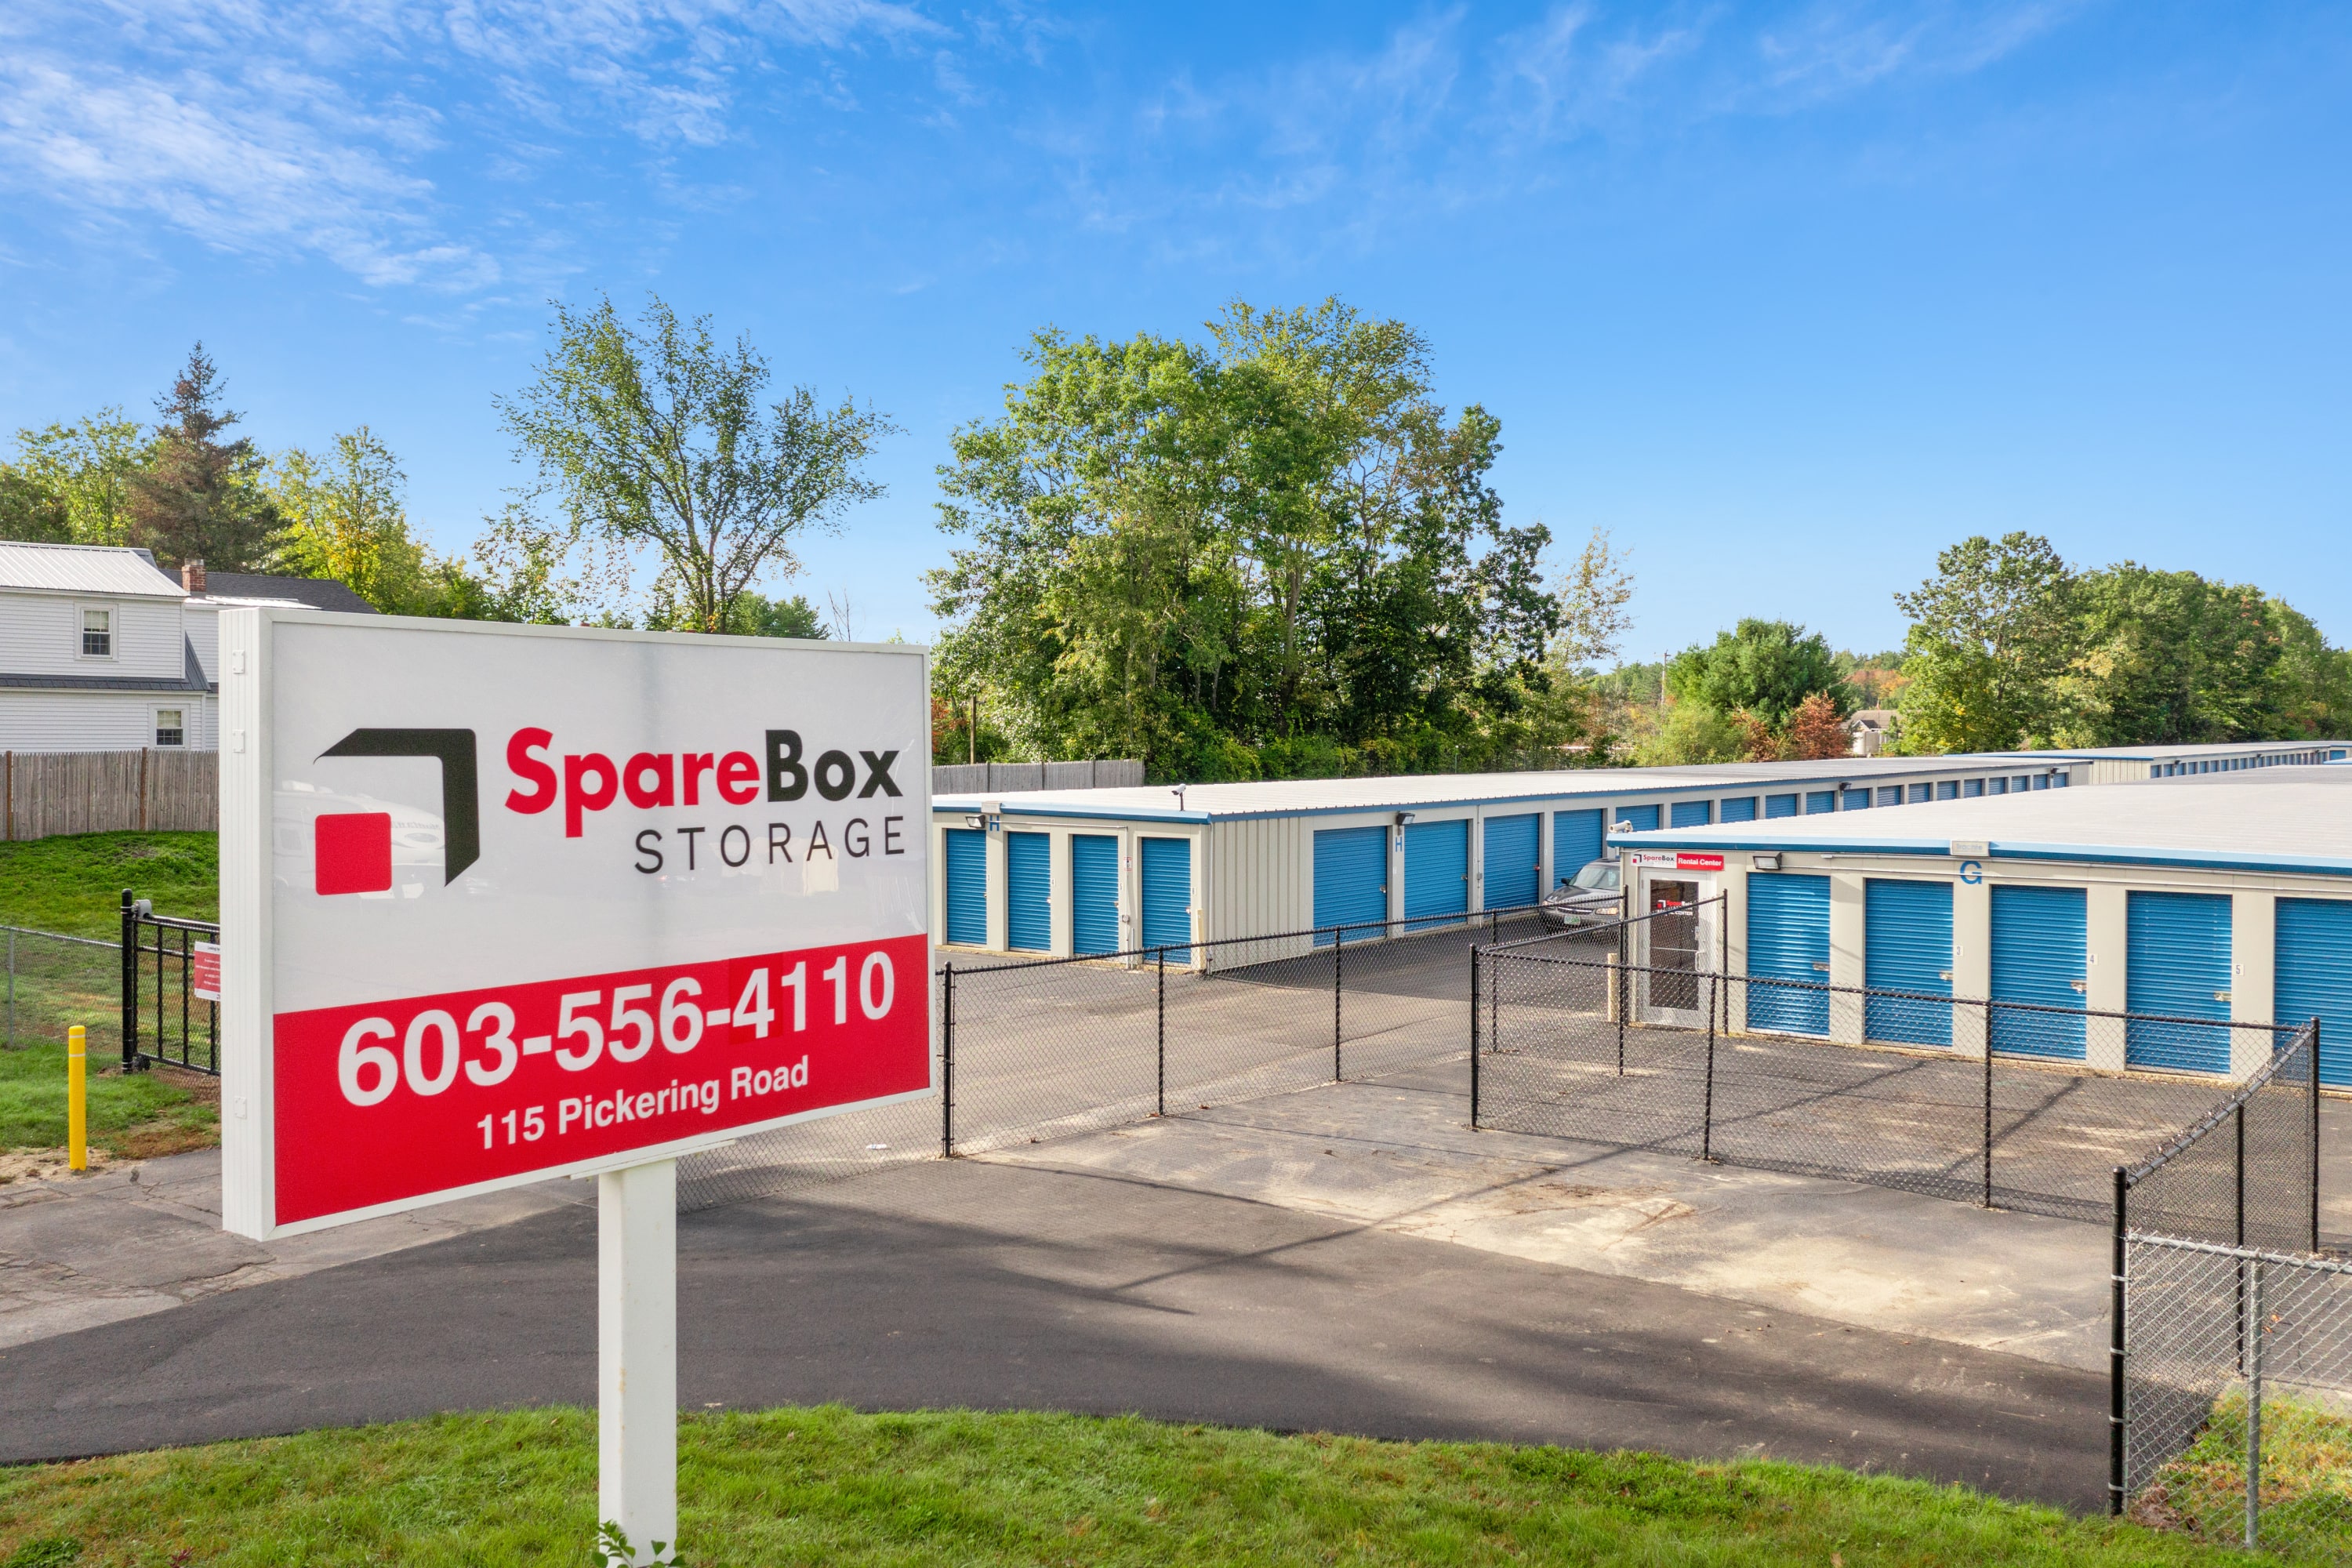 SpareBox Storage offers boat RV and car storage in Rochester, NH | SpareBox Storage